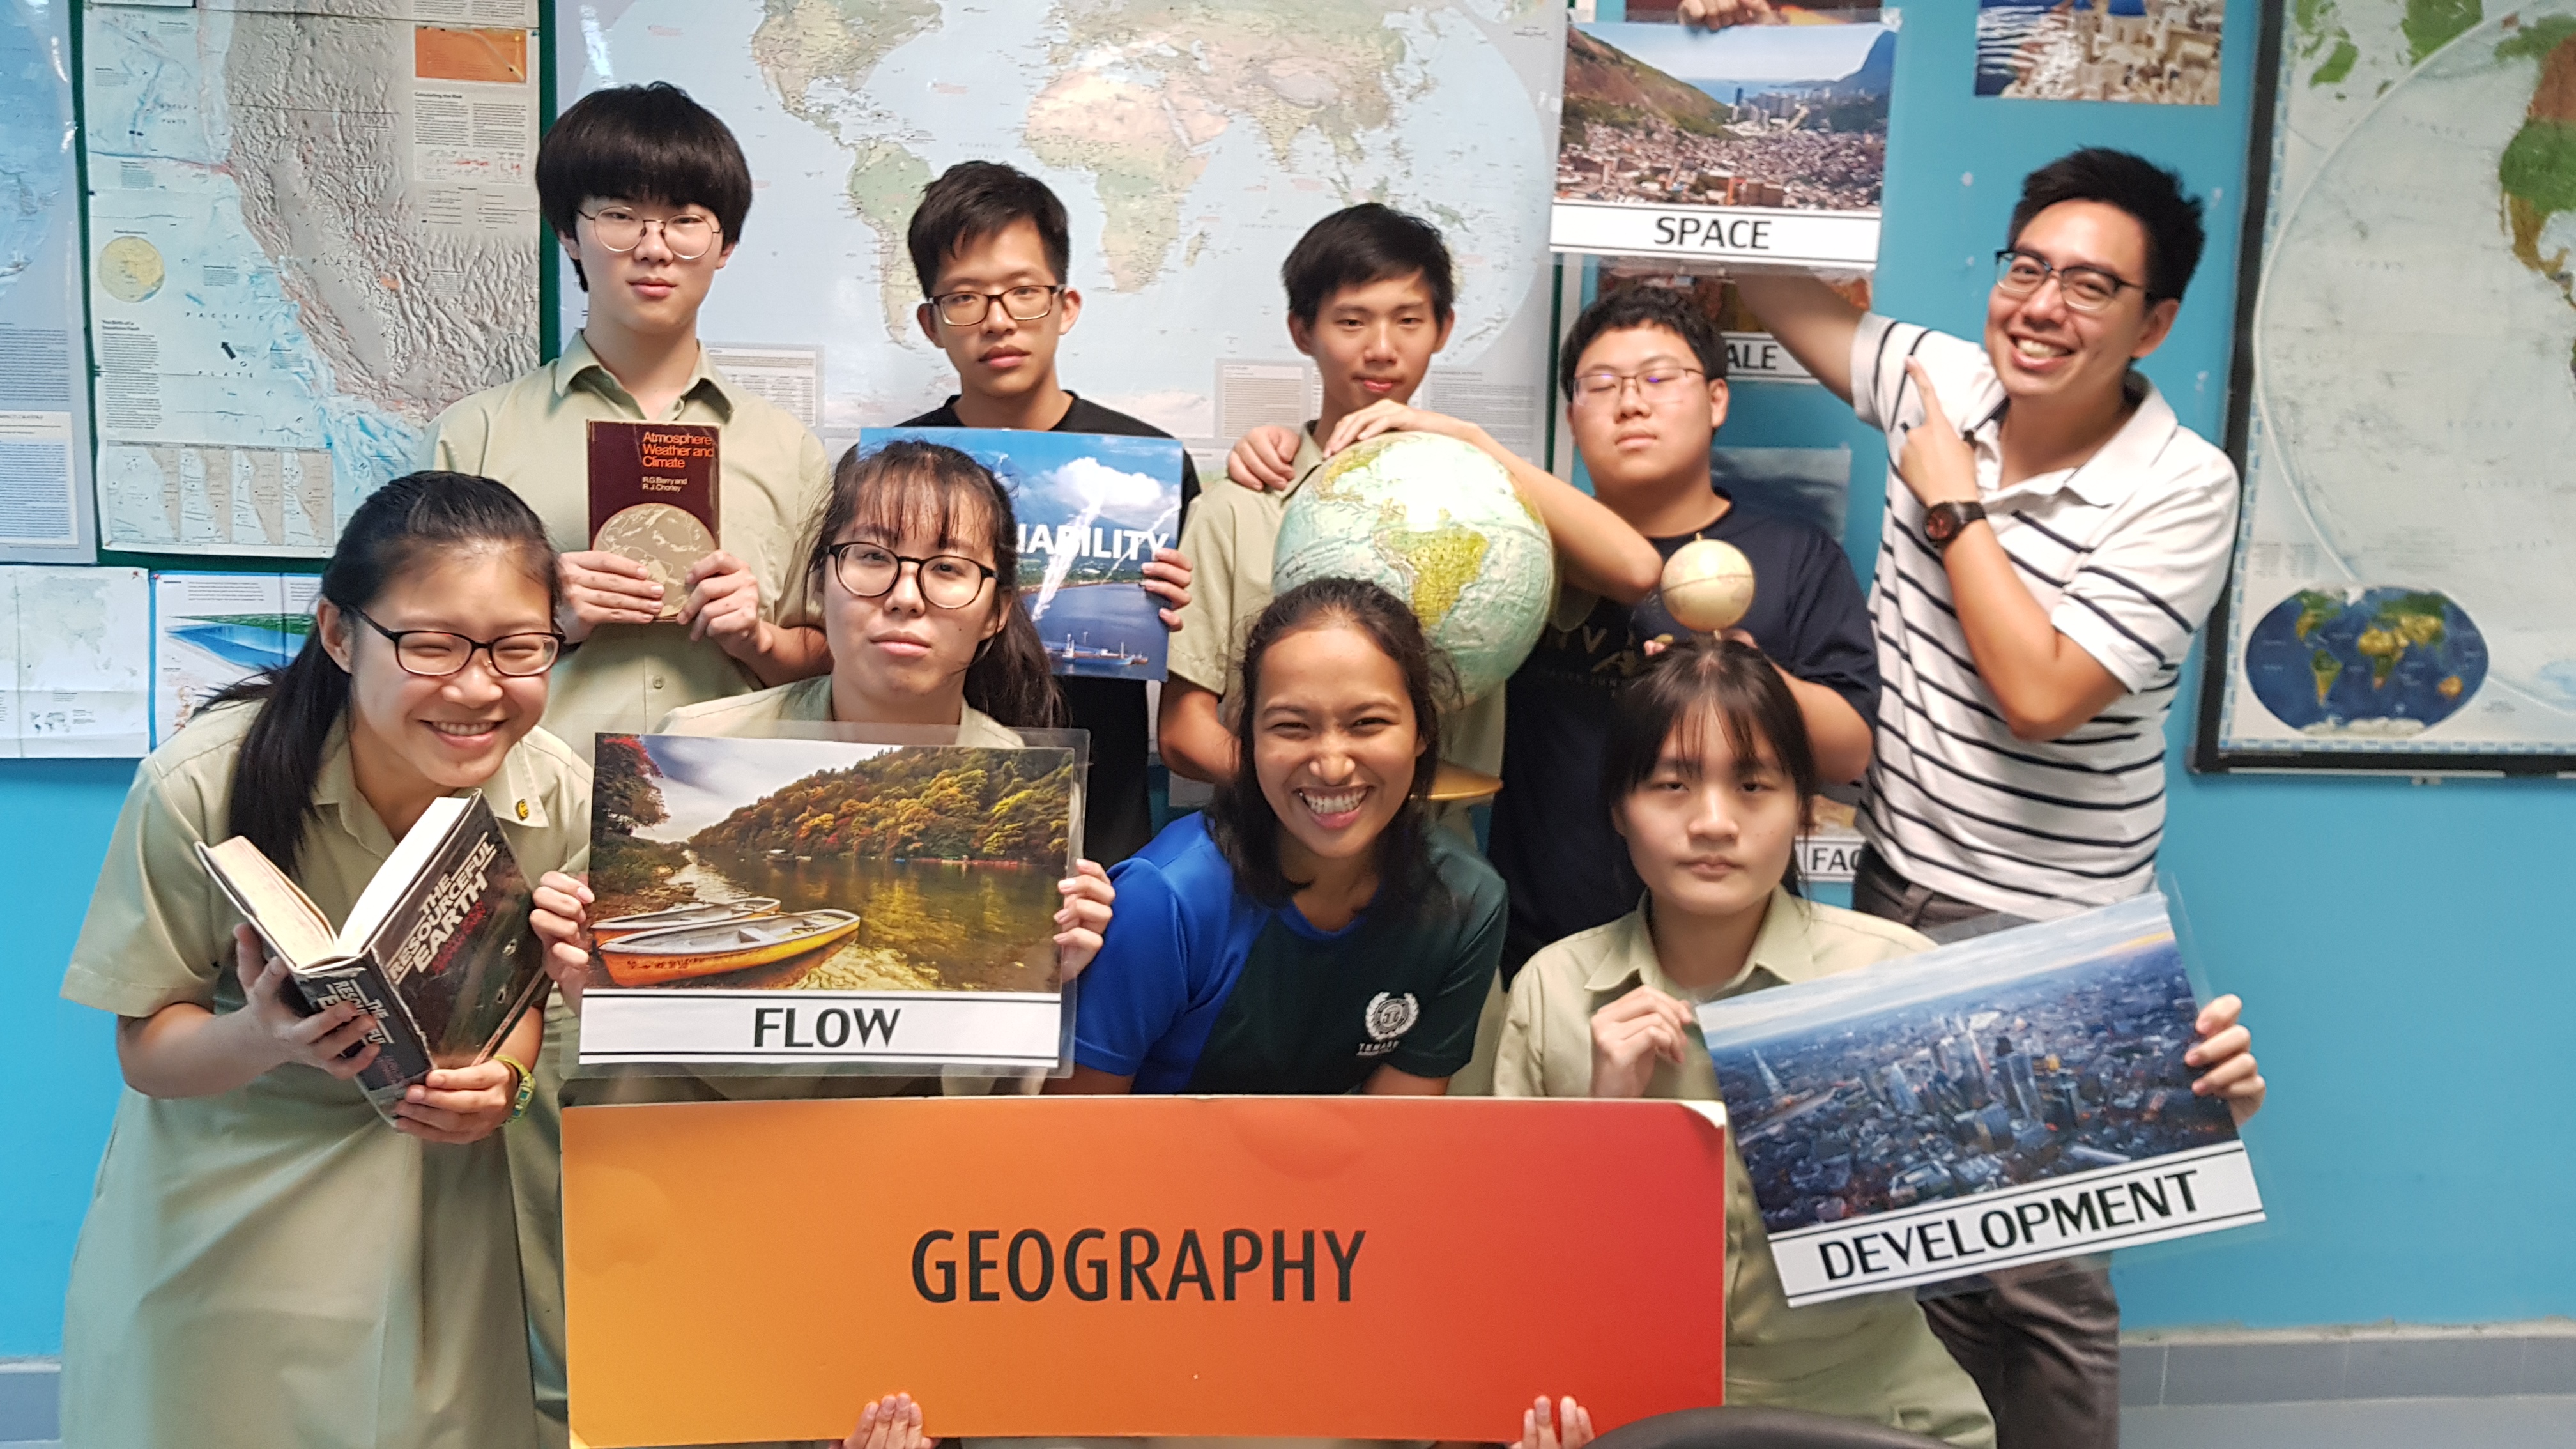 Mr Jared Wong shows his students that the lessons of Geography are part of everyday life. (Photo taken before COVID-19.)